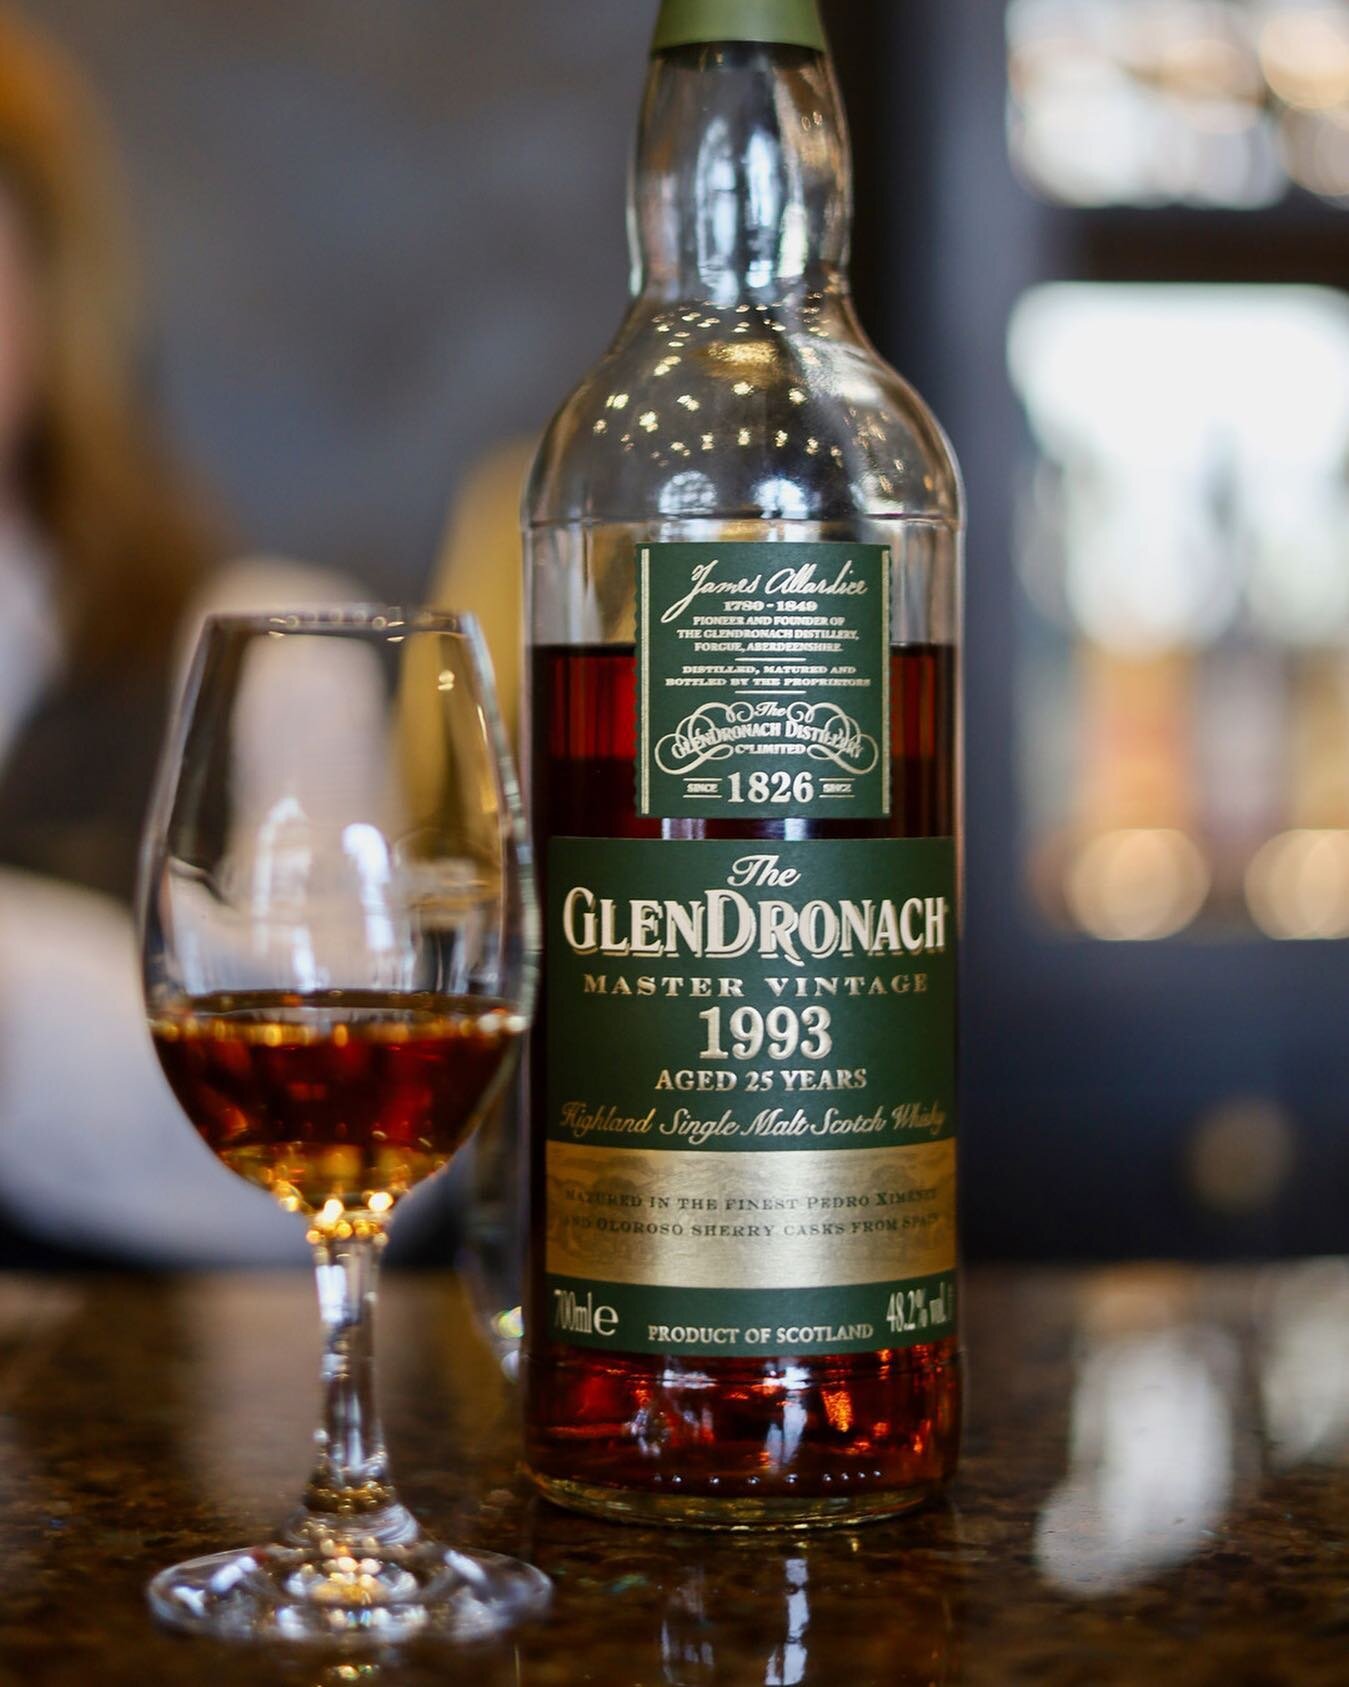 Glendronach Master Vintage 1993
⠀⠀⠀⠀⠀⠀⠀⠀⠀
The year 1993 is supposed to be one of the finer vintages for the Glendronach distillery. This Master Vintage bottling was created to showcase these casks.
⠀⠀⠀⠀⠀⠀⠀⠀⠀
I tried a dram of it and was immediately c